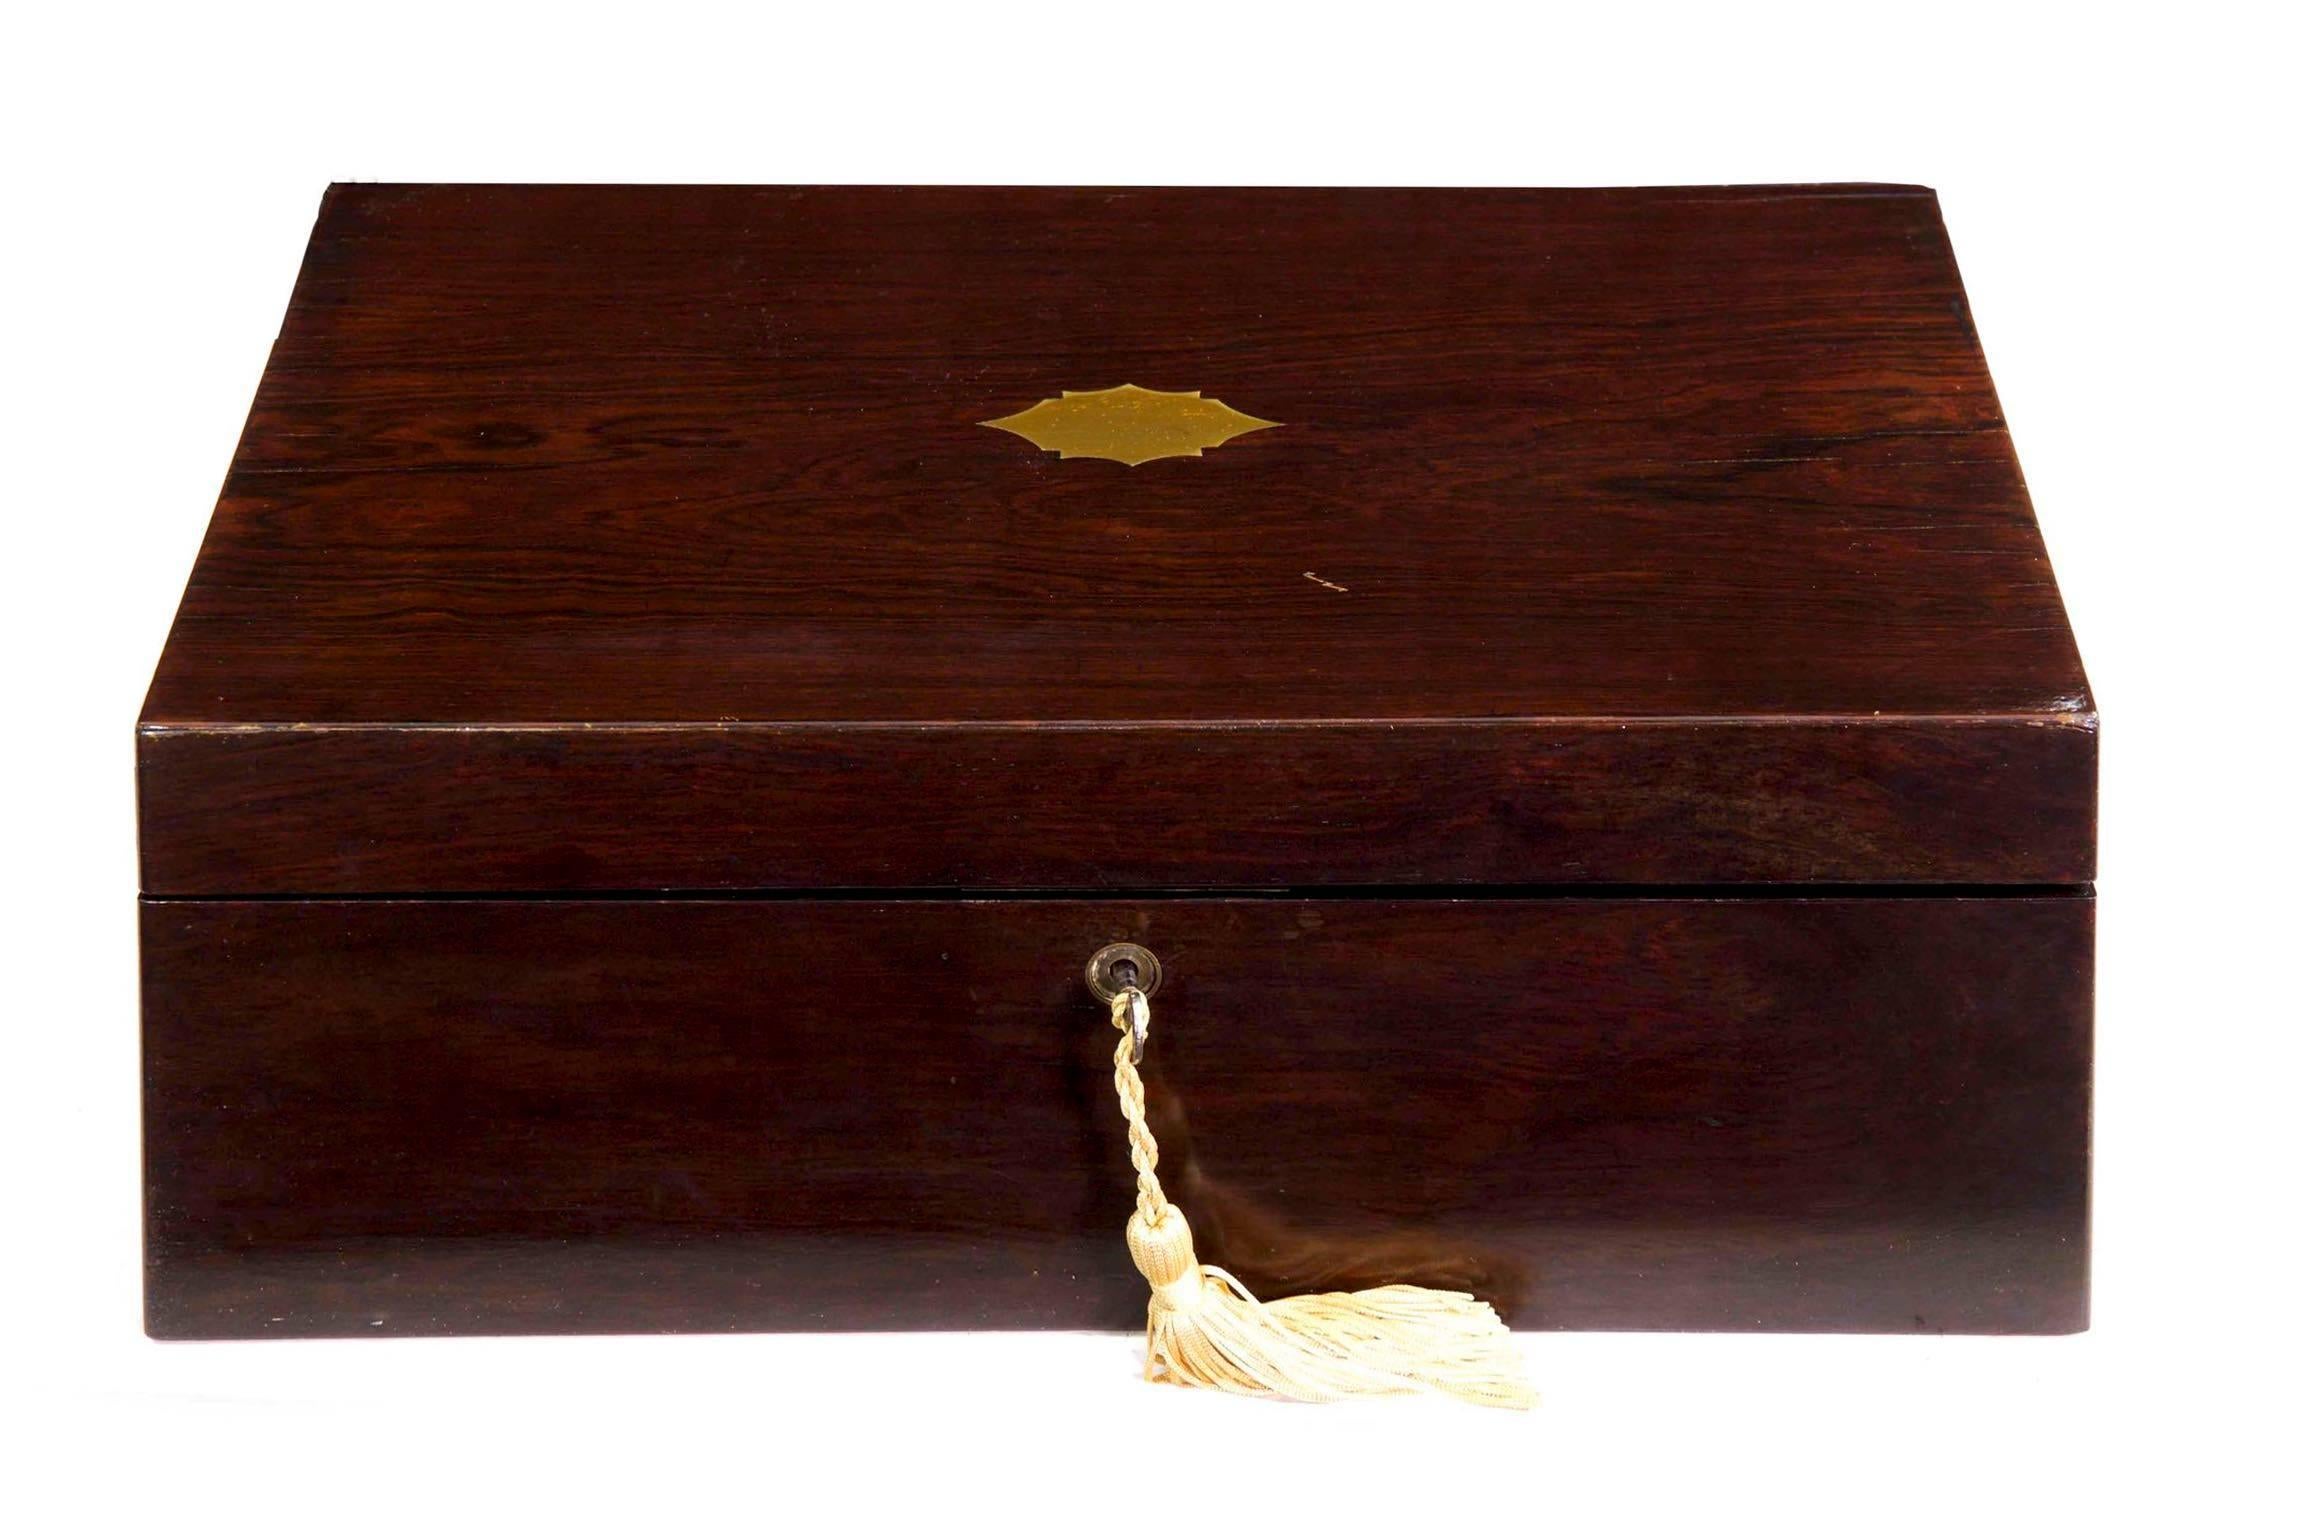 A very nice quality English Regency period rosewood and brass writing slope, this is a fine piece remaining in excellent original condition. It opens to reveal an early tooled green leather writing surface with a locking upper that opens to reveal a